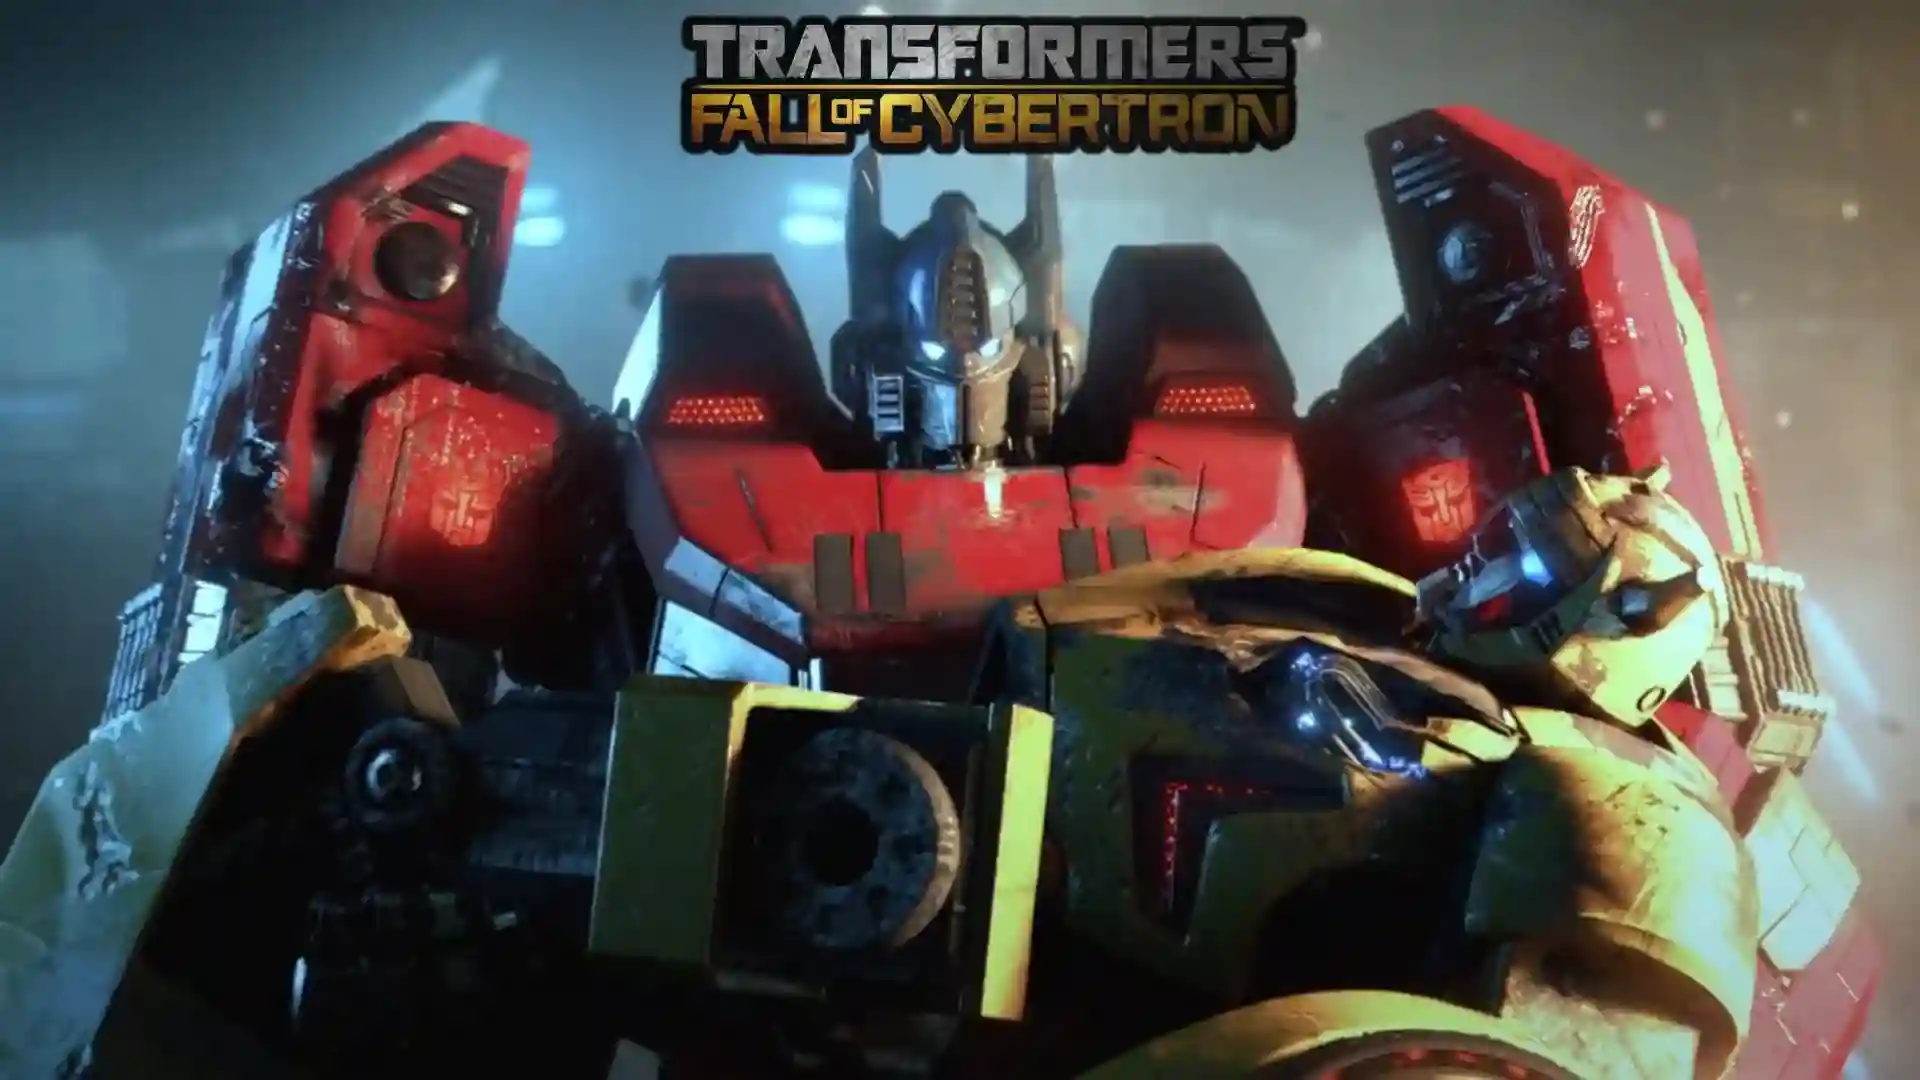 Transformers Fall of Cybertron